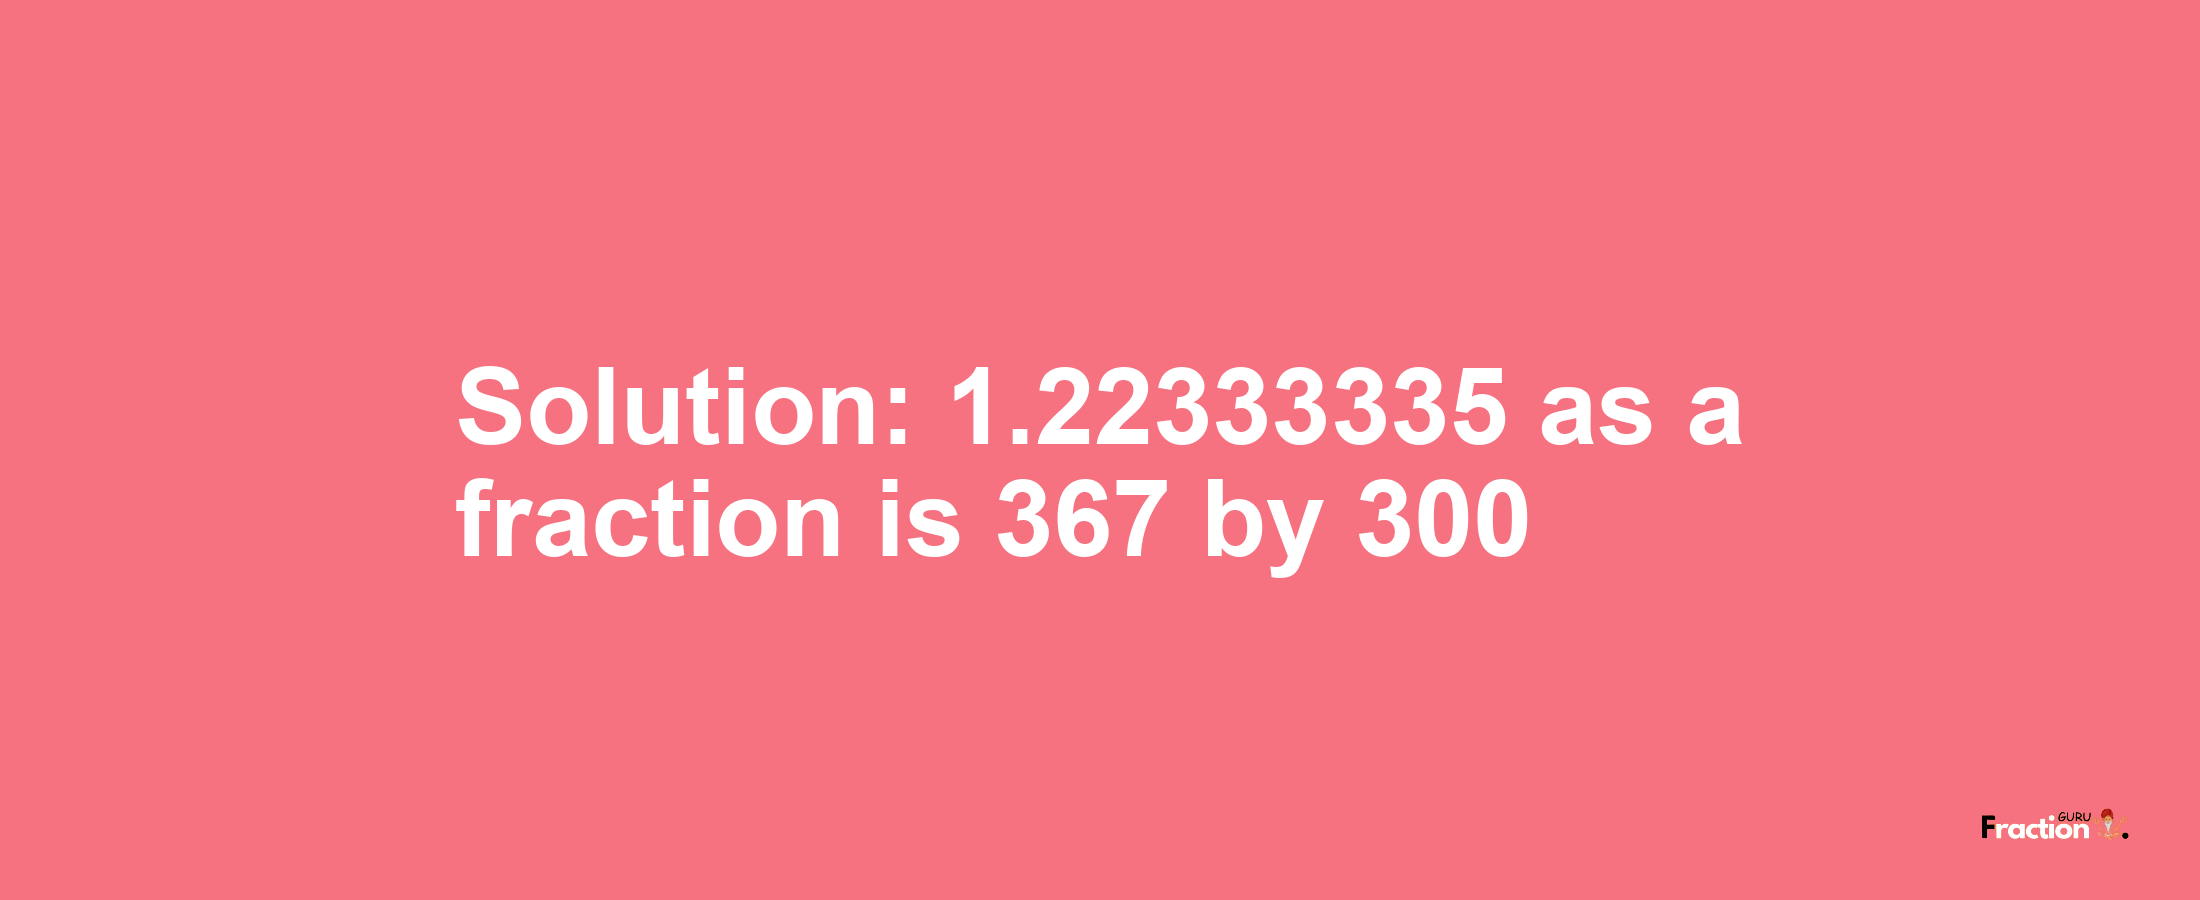 Solution:1.22333335 as a fraction is 367/300